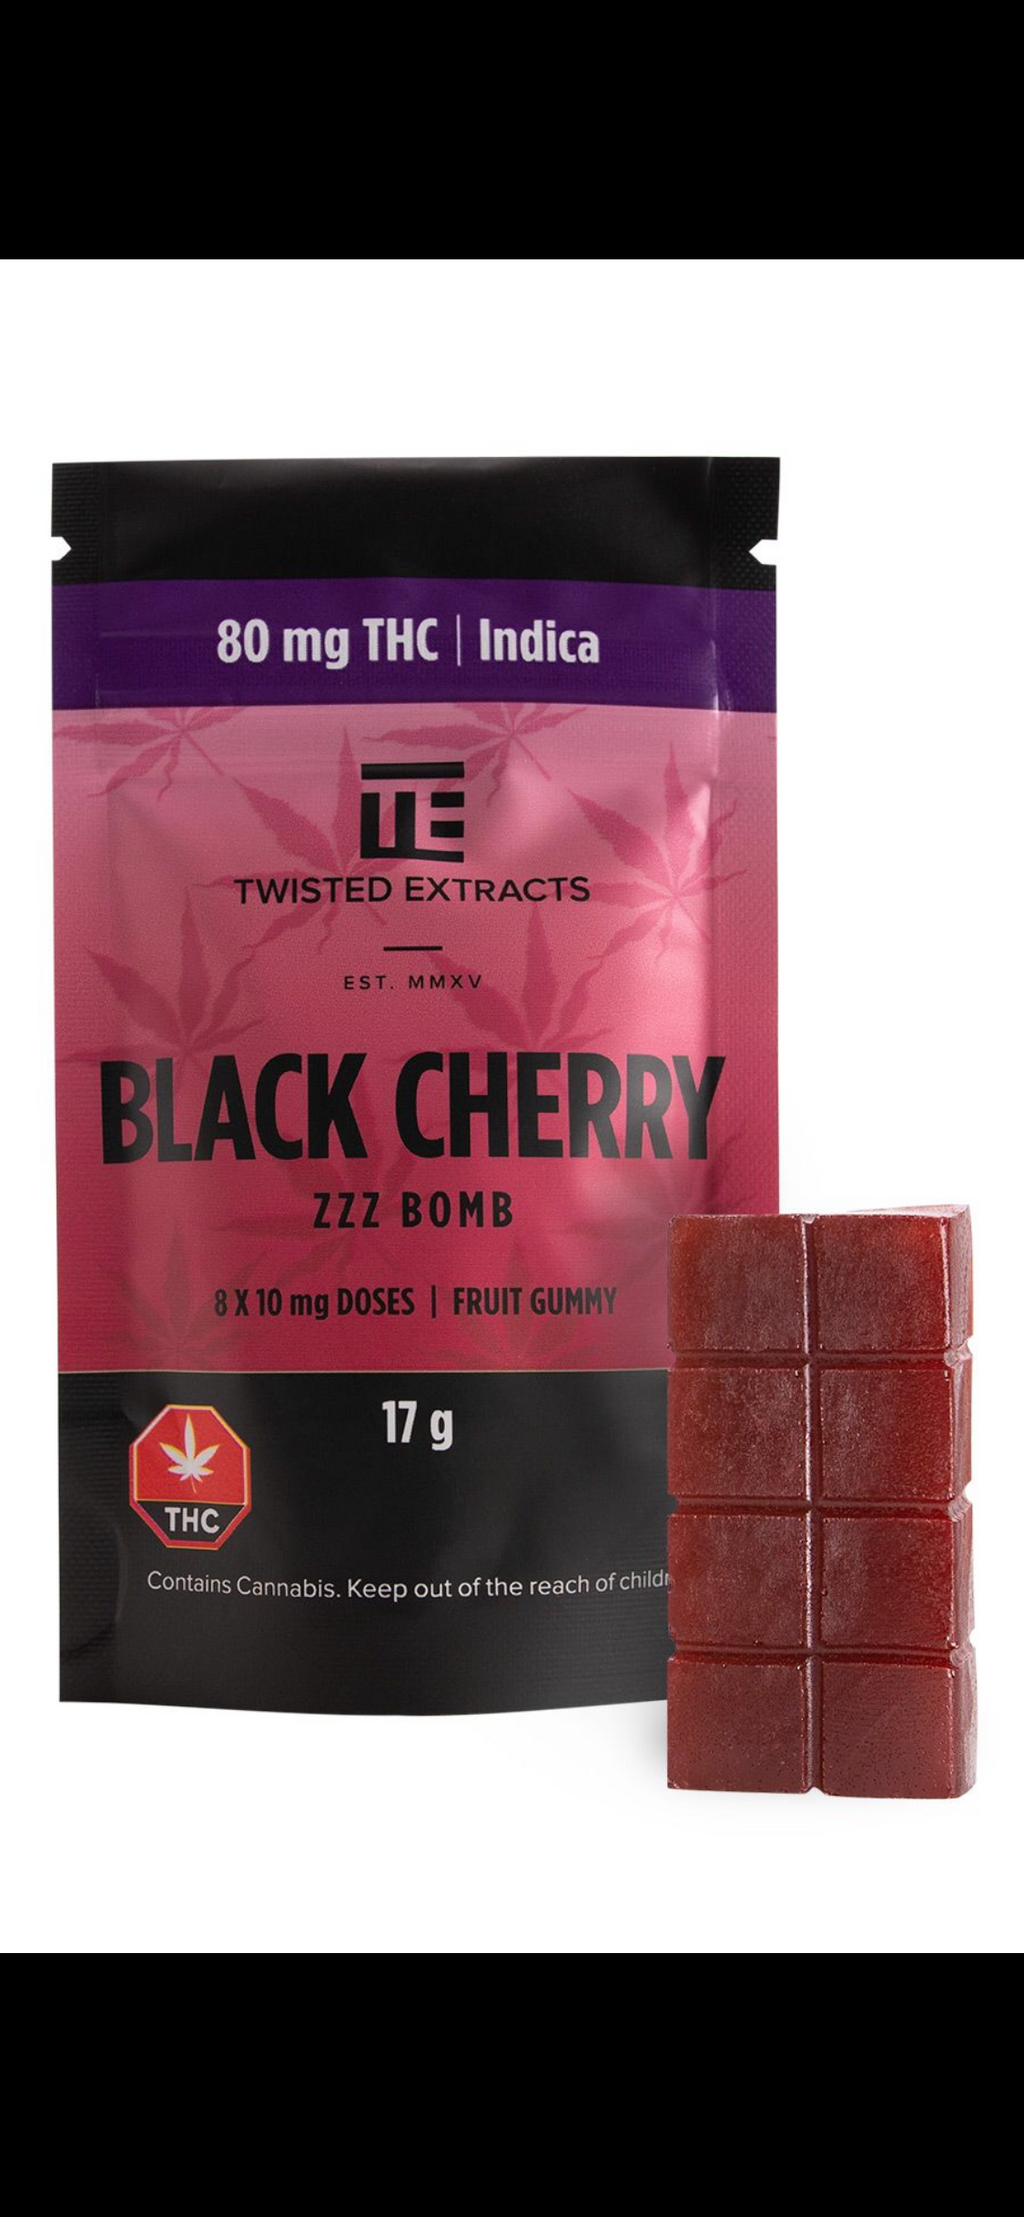 Twisted Extracts Black Cherry– ZZZ Bomb (80mg THC)